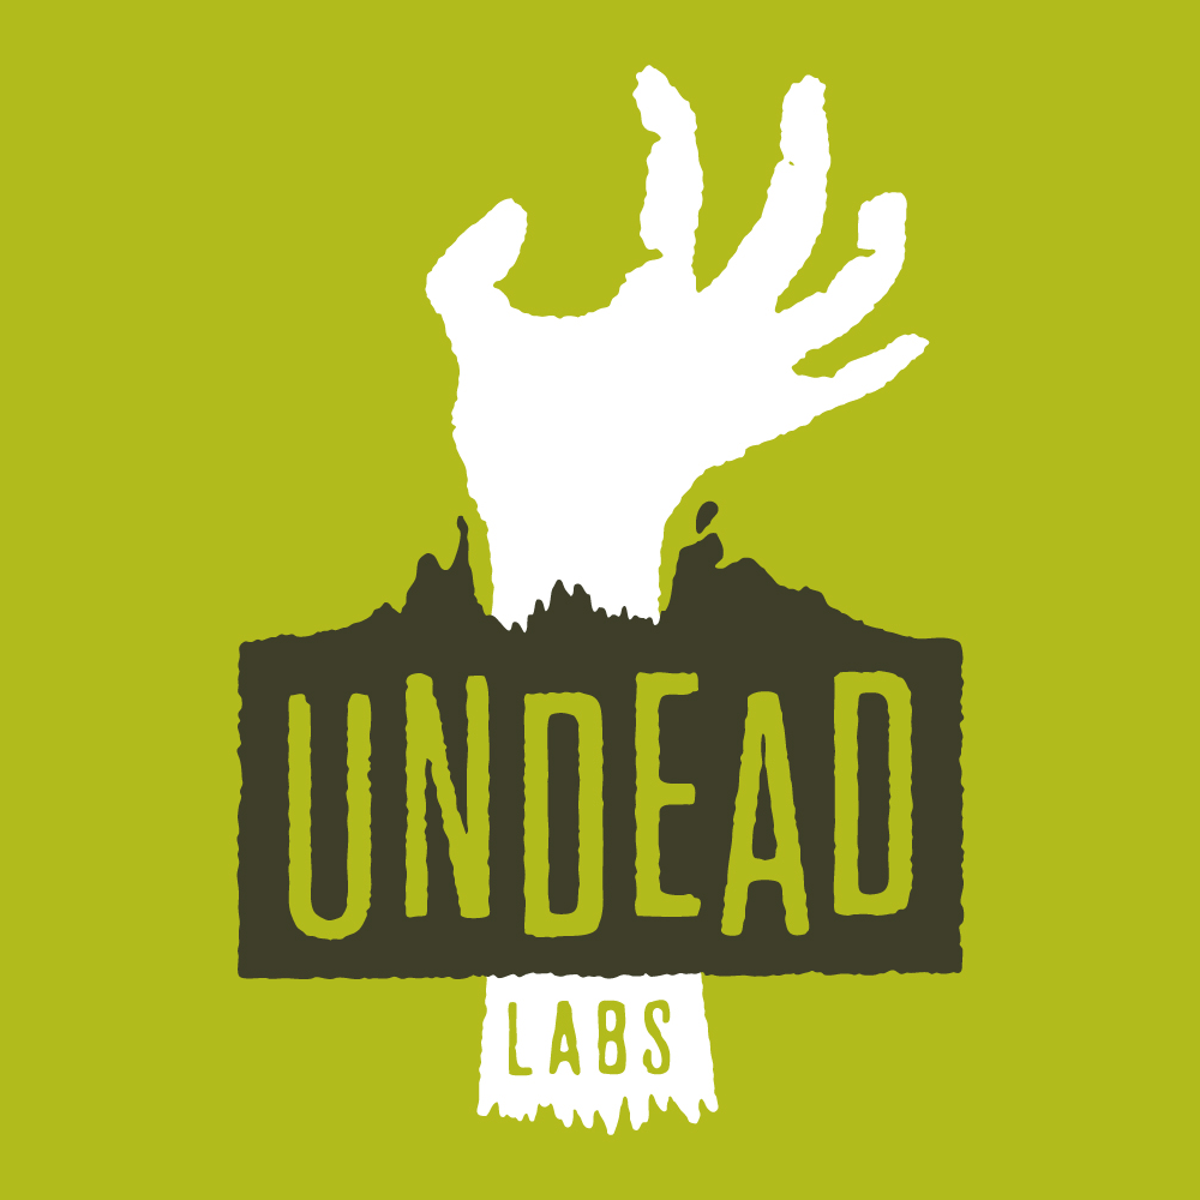 State of Decay 3 trapped in pre-production as sexism and mismanagement  allegations hit Undead Labs